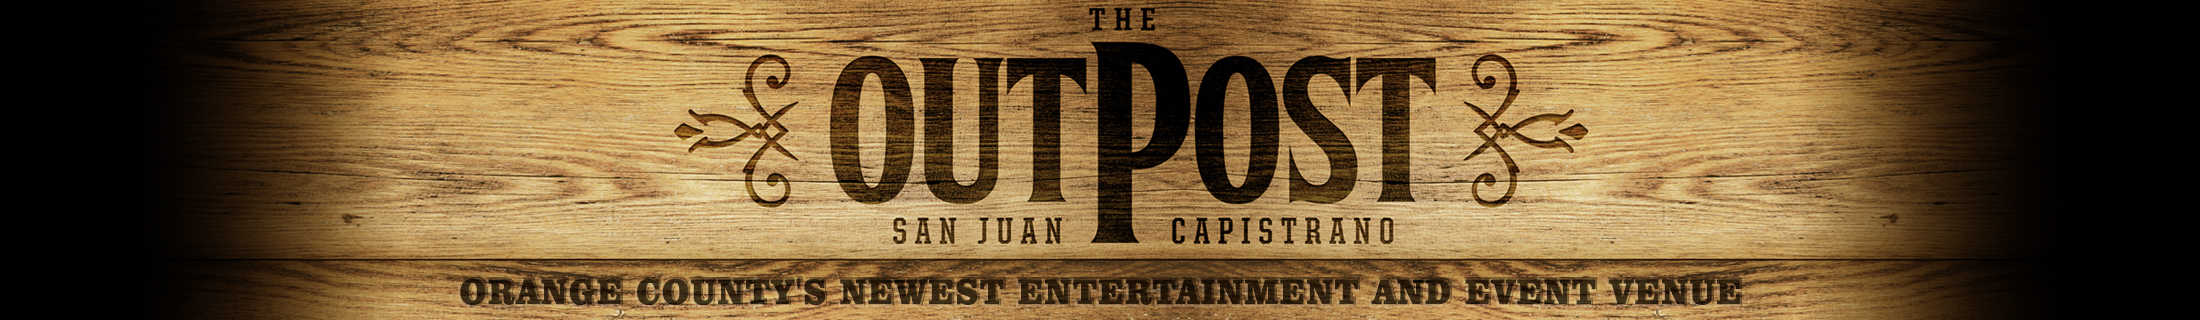 OUTPOST-HEADER-wood